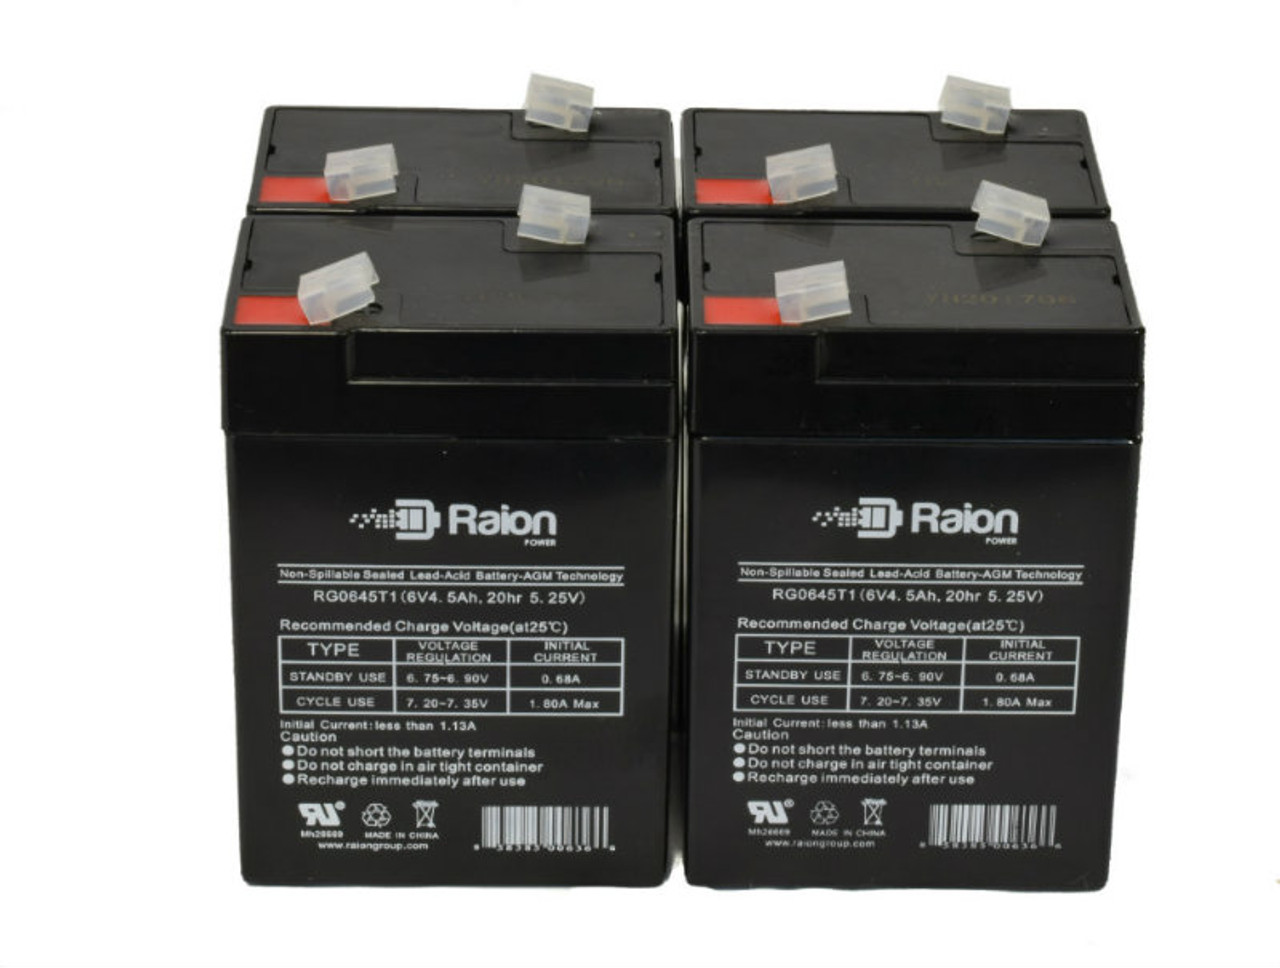 Raion Power 6V 4.5Ah Replacement Emergency Light Battery for Astralite 20-0002 - 4 Pack